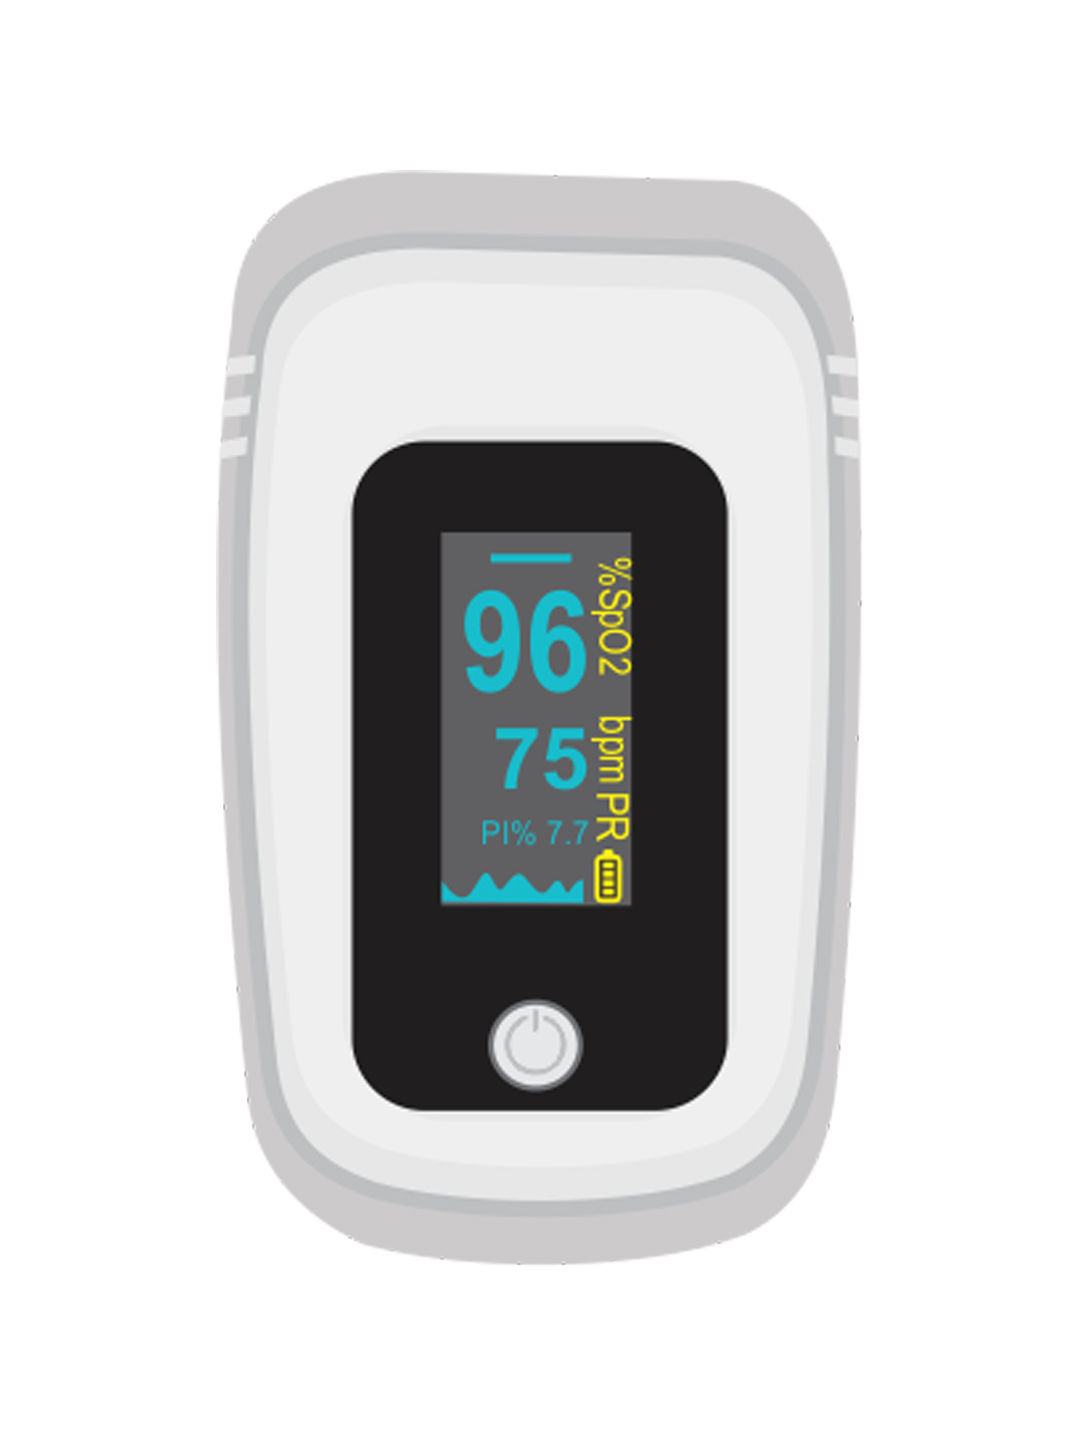 Dr. Odin TY-01 Pulse Oximeter with PI%